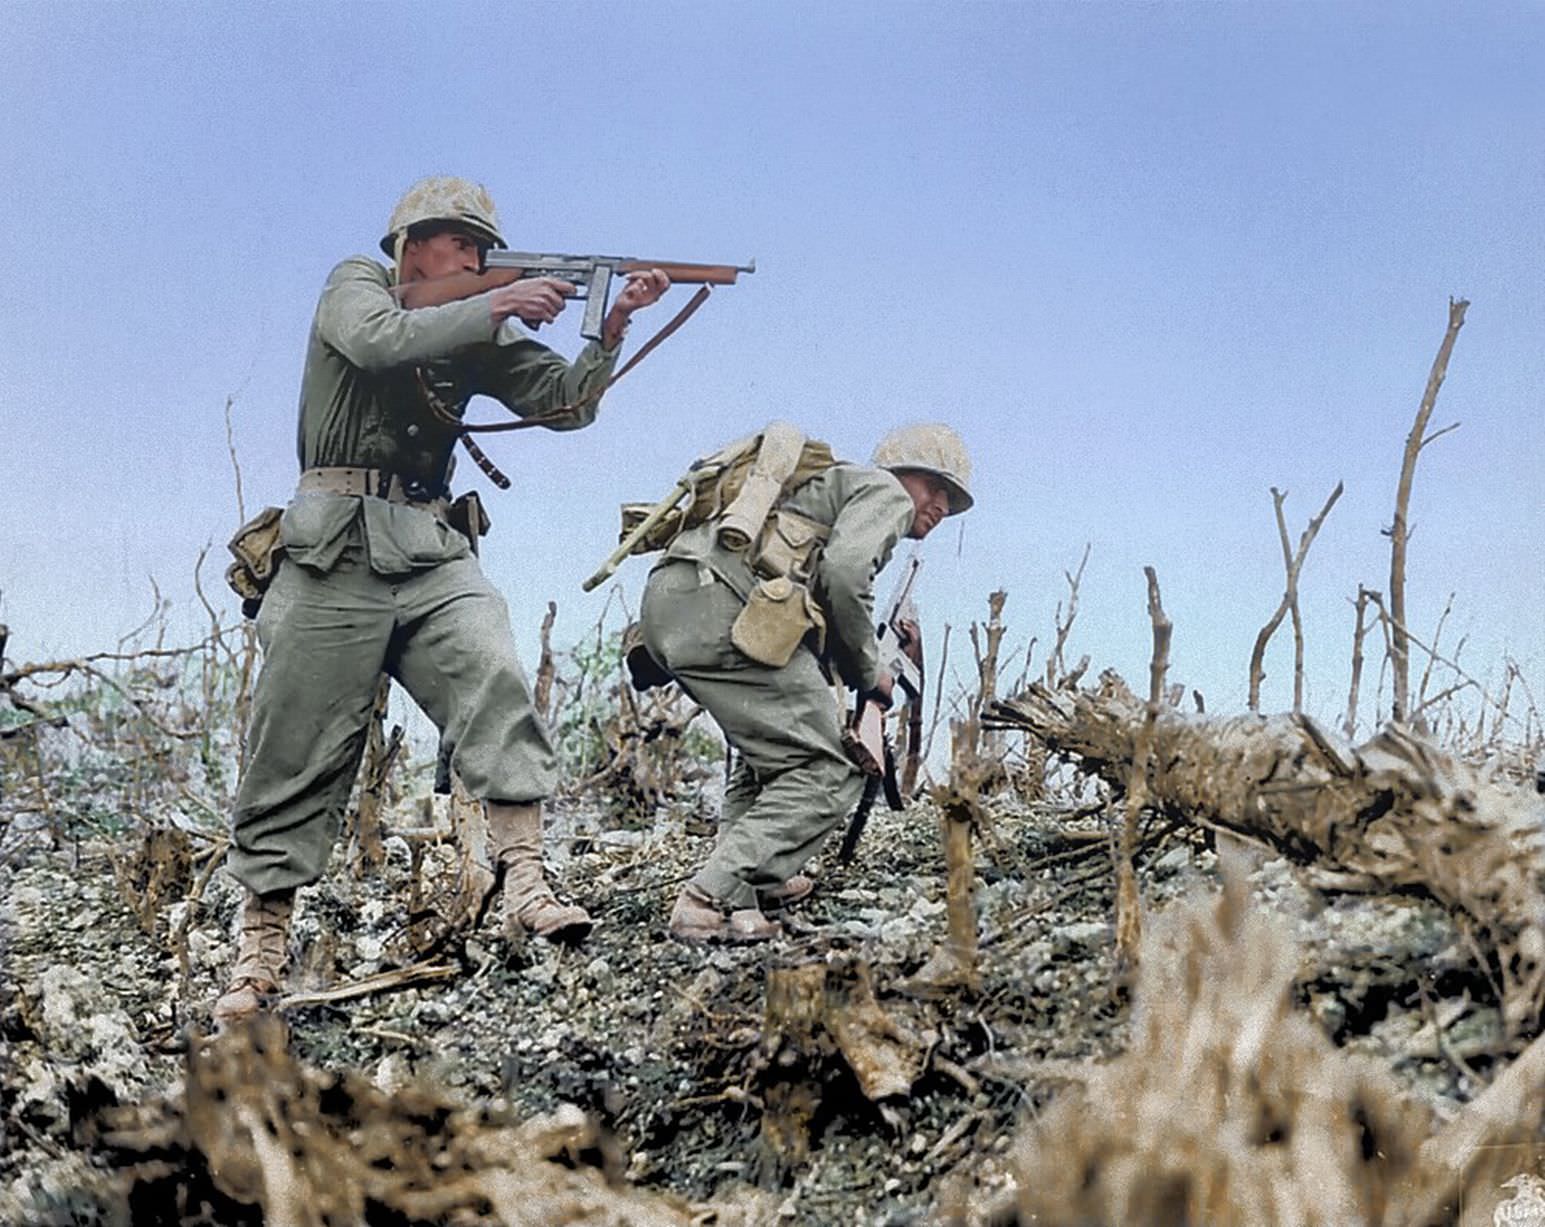 Two Marines from the 2nd Battalion, 1st Marine Regiment during fighting at Wana Ridge during the Battle of Okinawa, May 1945.